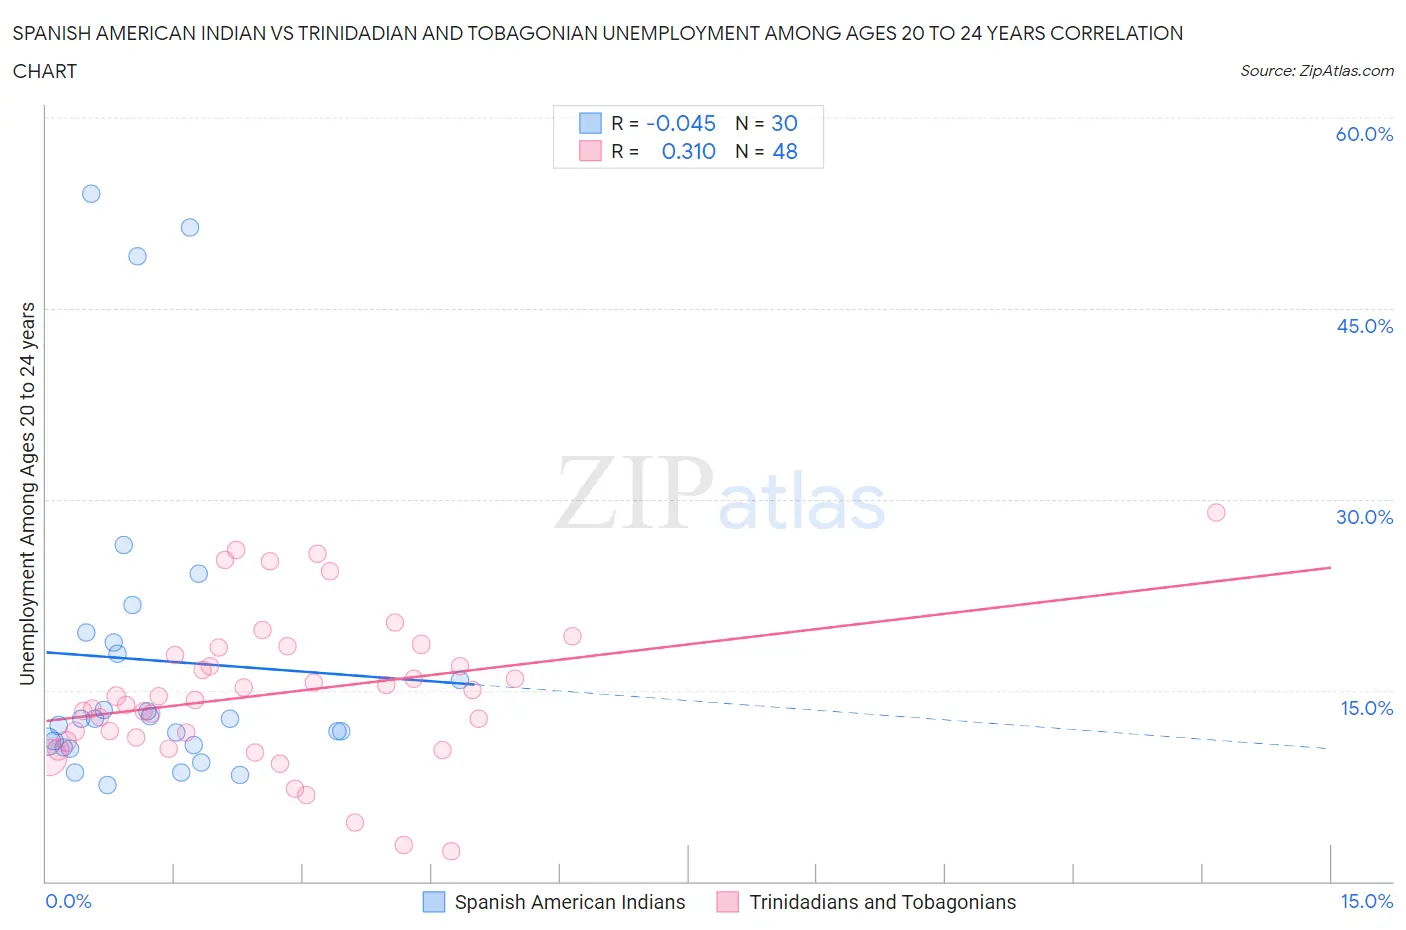 Spanish American Indian vs Trinidadian and Tobagonian Unemployment Among Ages 20 to 24 years